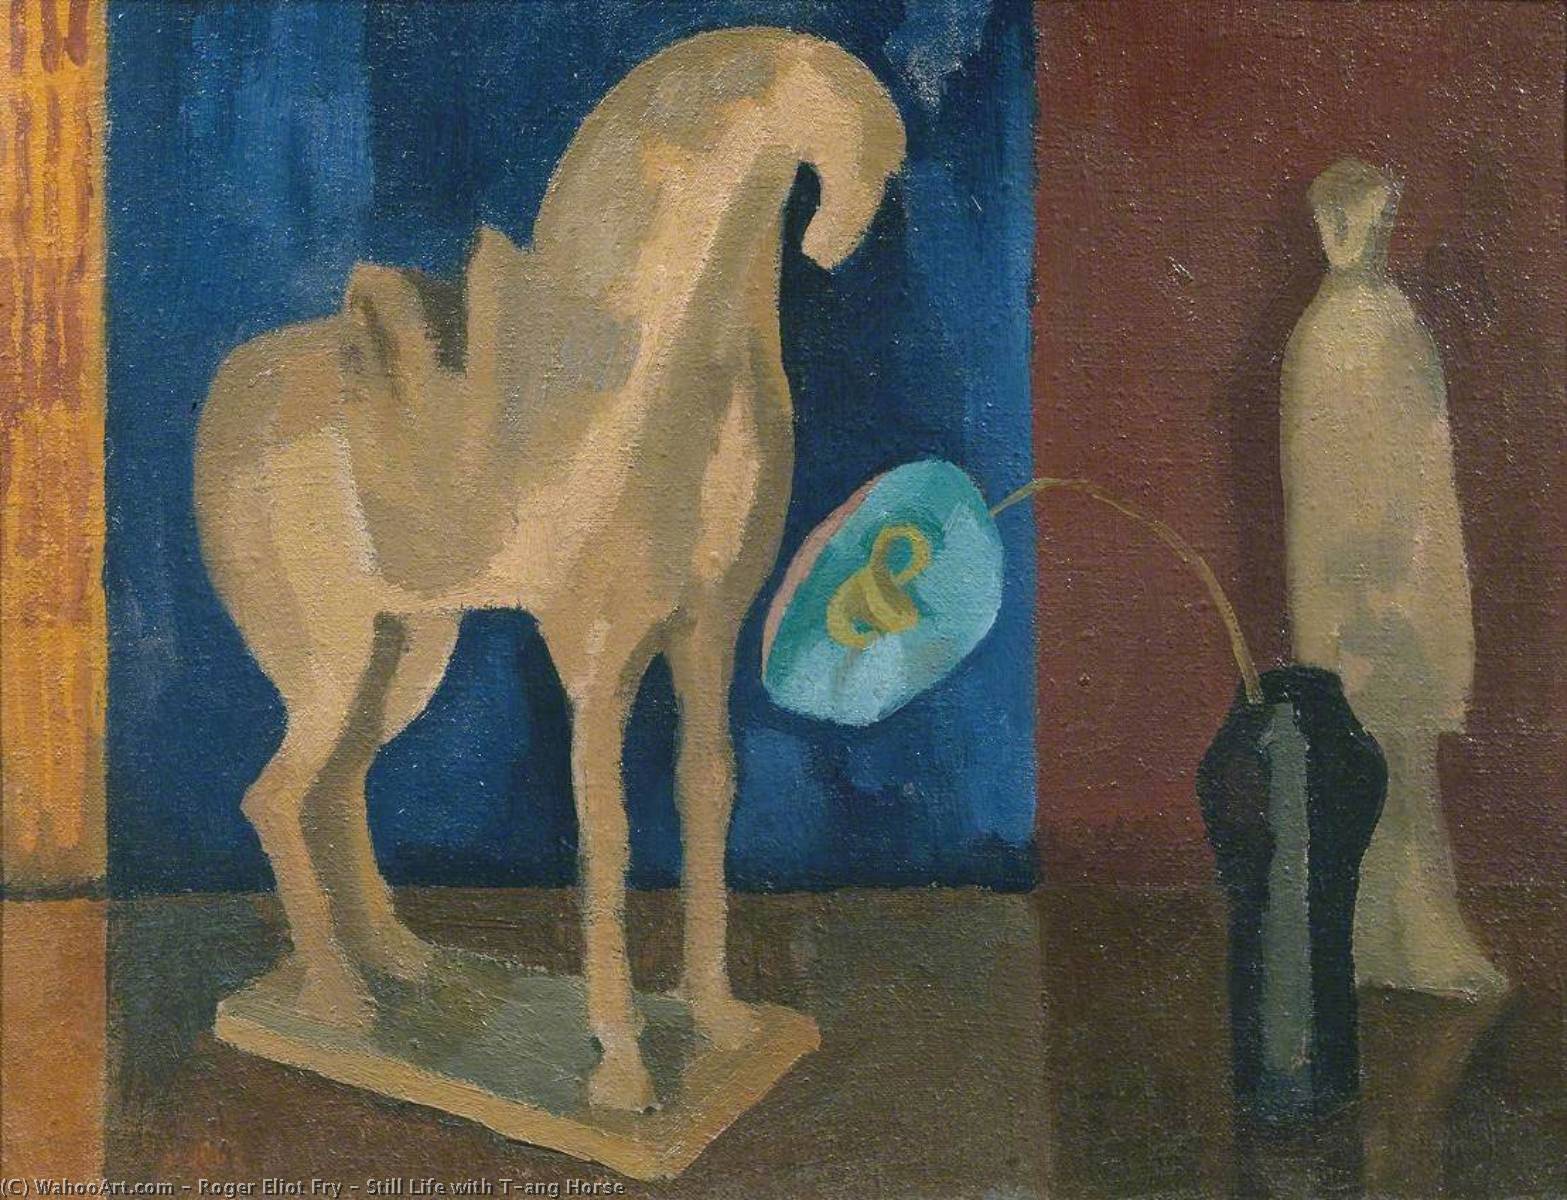 WikiOO.org - Encyclopedia of Fine Arts - Lukisan, Artwork Roger Eliot Fry - Still Life with T'ang Horse